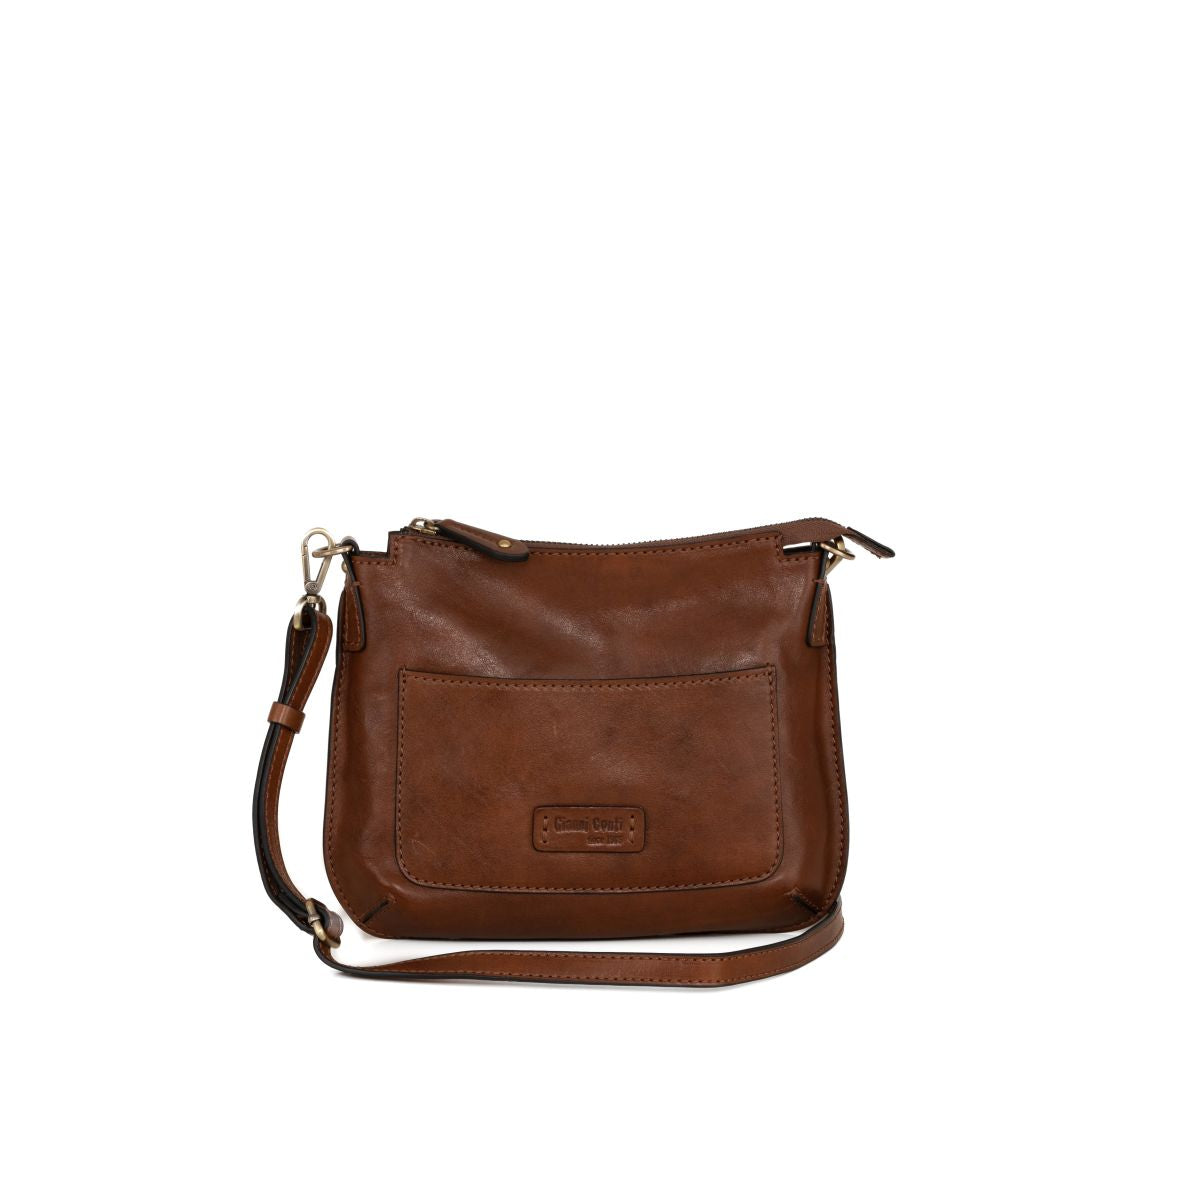 Brown leather crossbody bag with front pocket and adjustable strap